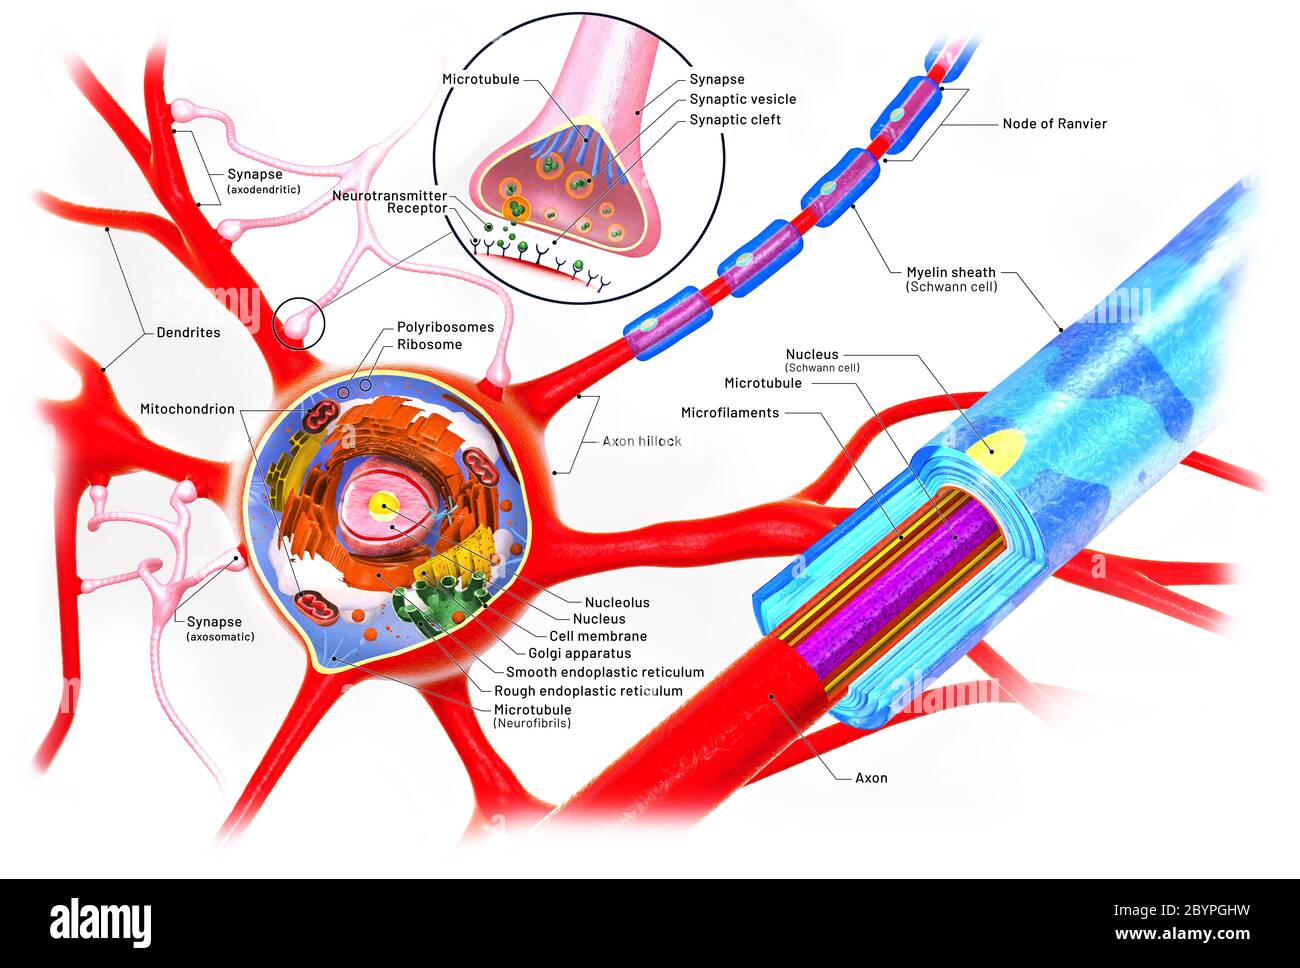 Cross section of a neuron and cell-building with descriptions - 3d illustration Stock Photo